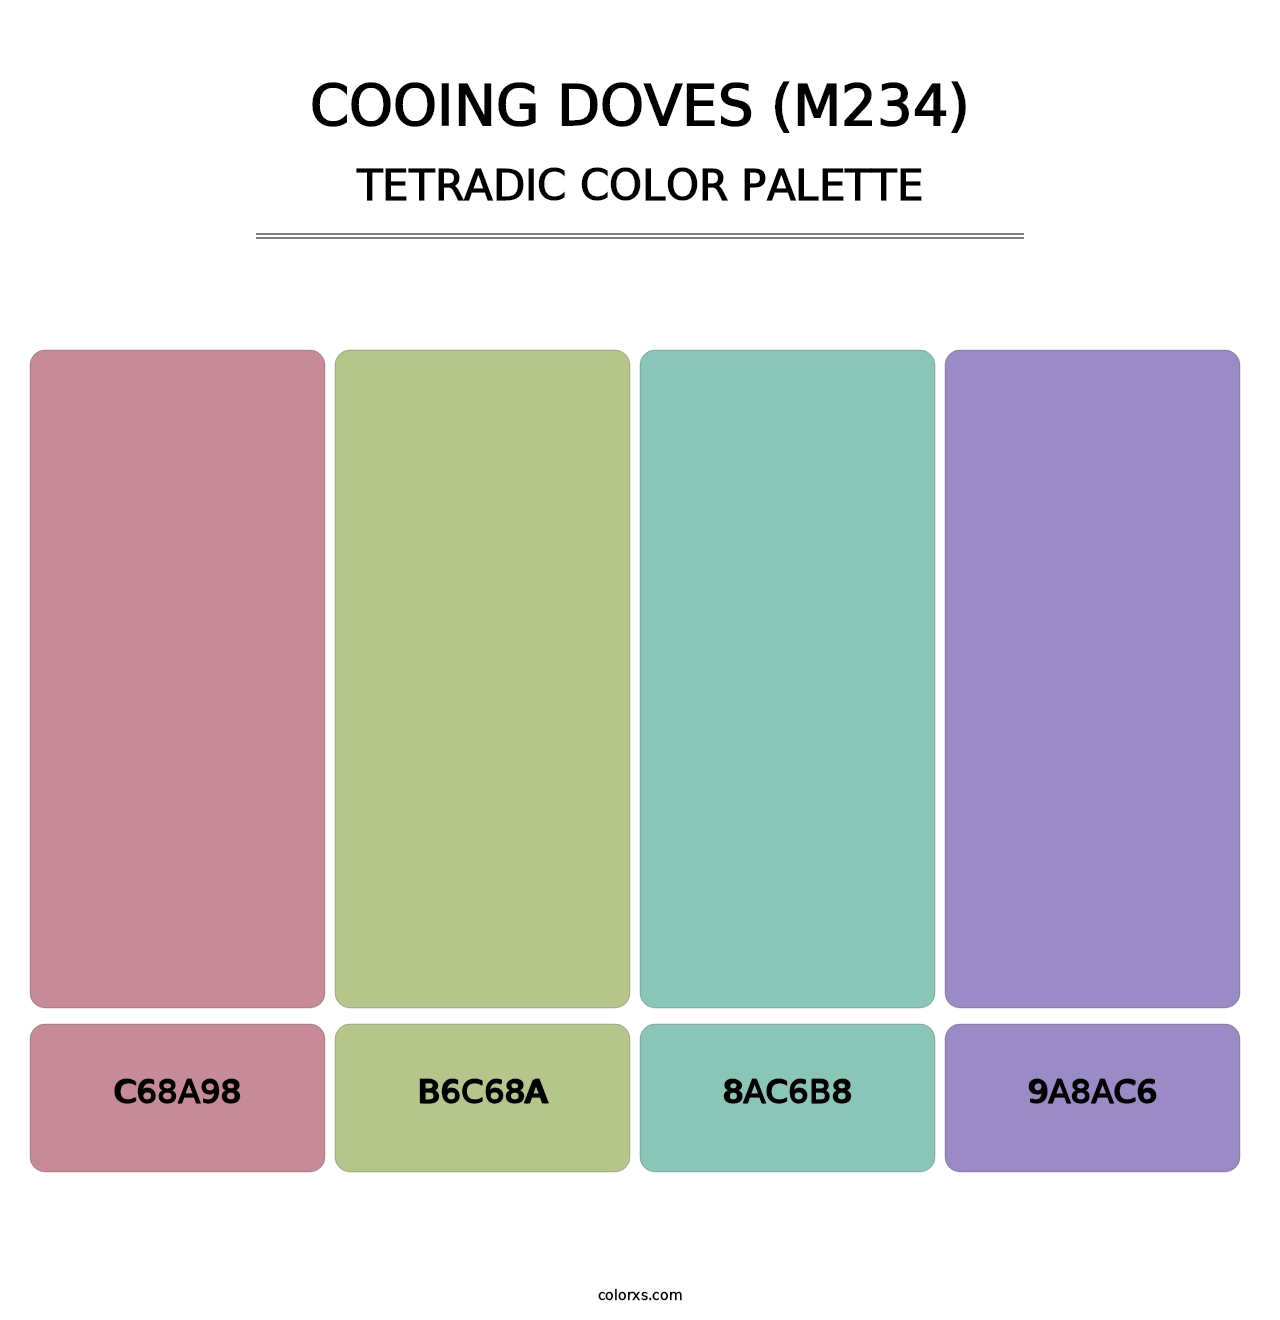 Cooing Doves (M234) - Tetradic Color Palette